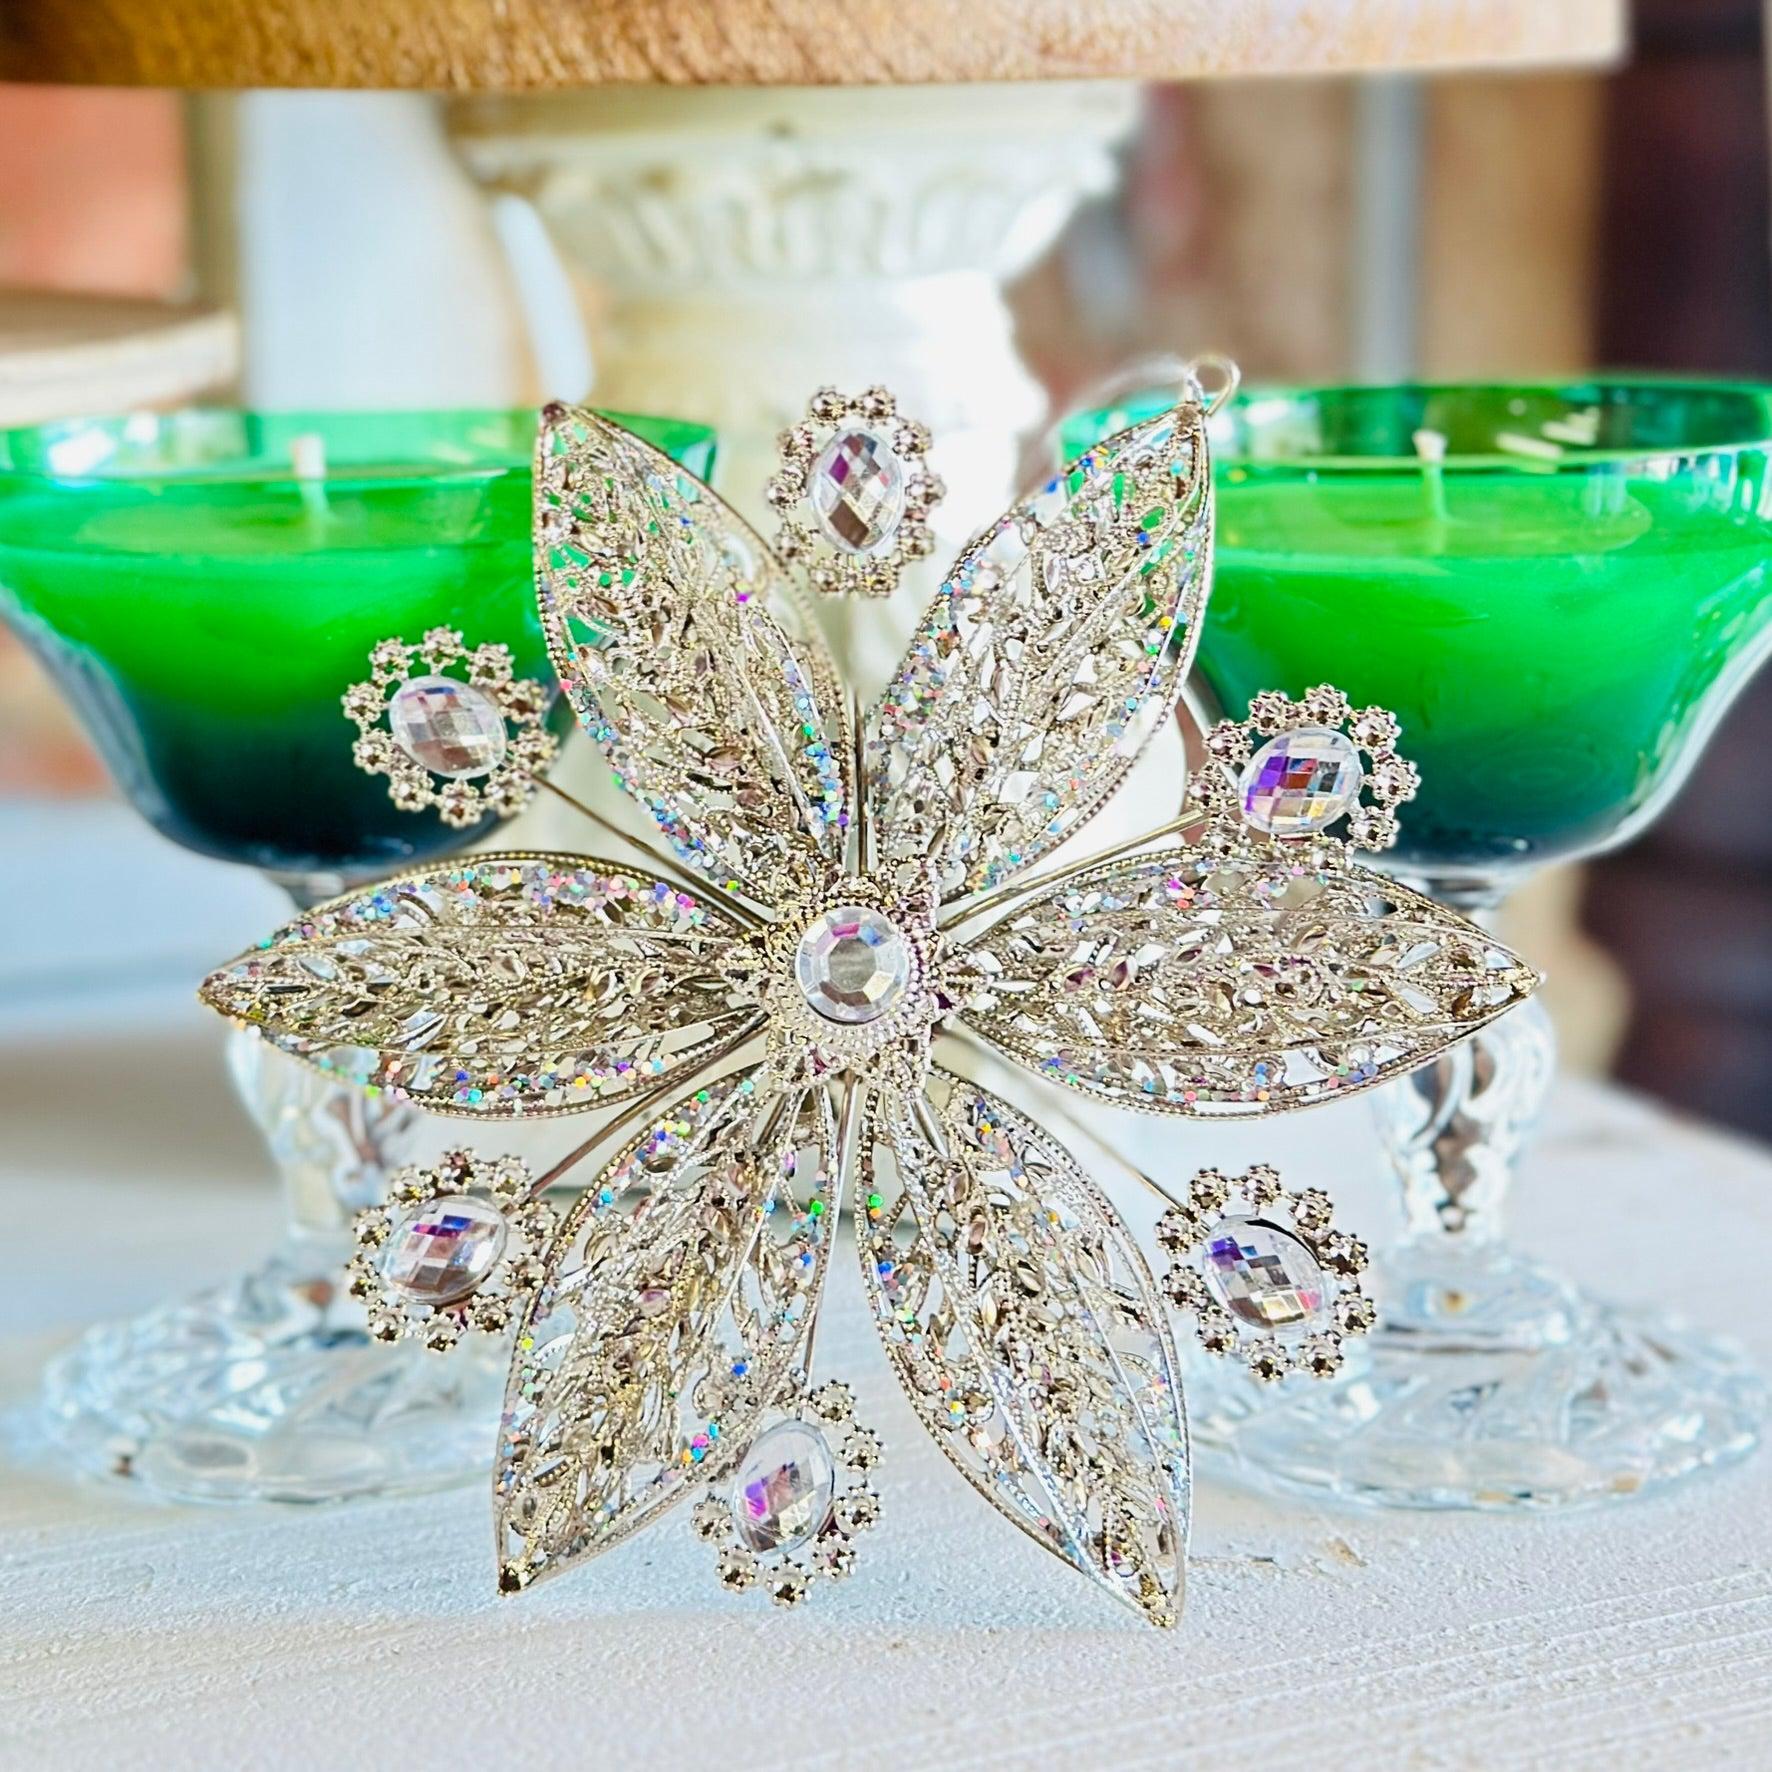 Vintage Emerald Champagne Glasses - Christmas Cabernet Soy Candle-Vintage Glass Candles-tbgypsysoul